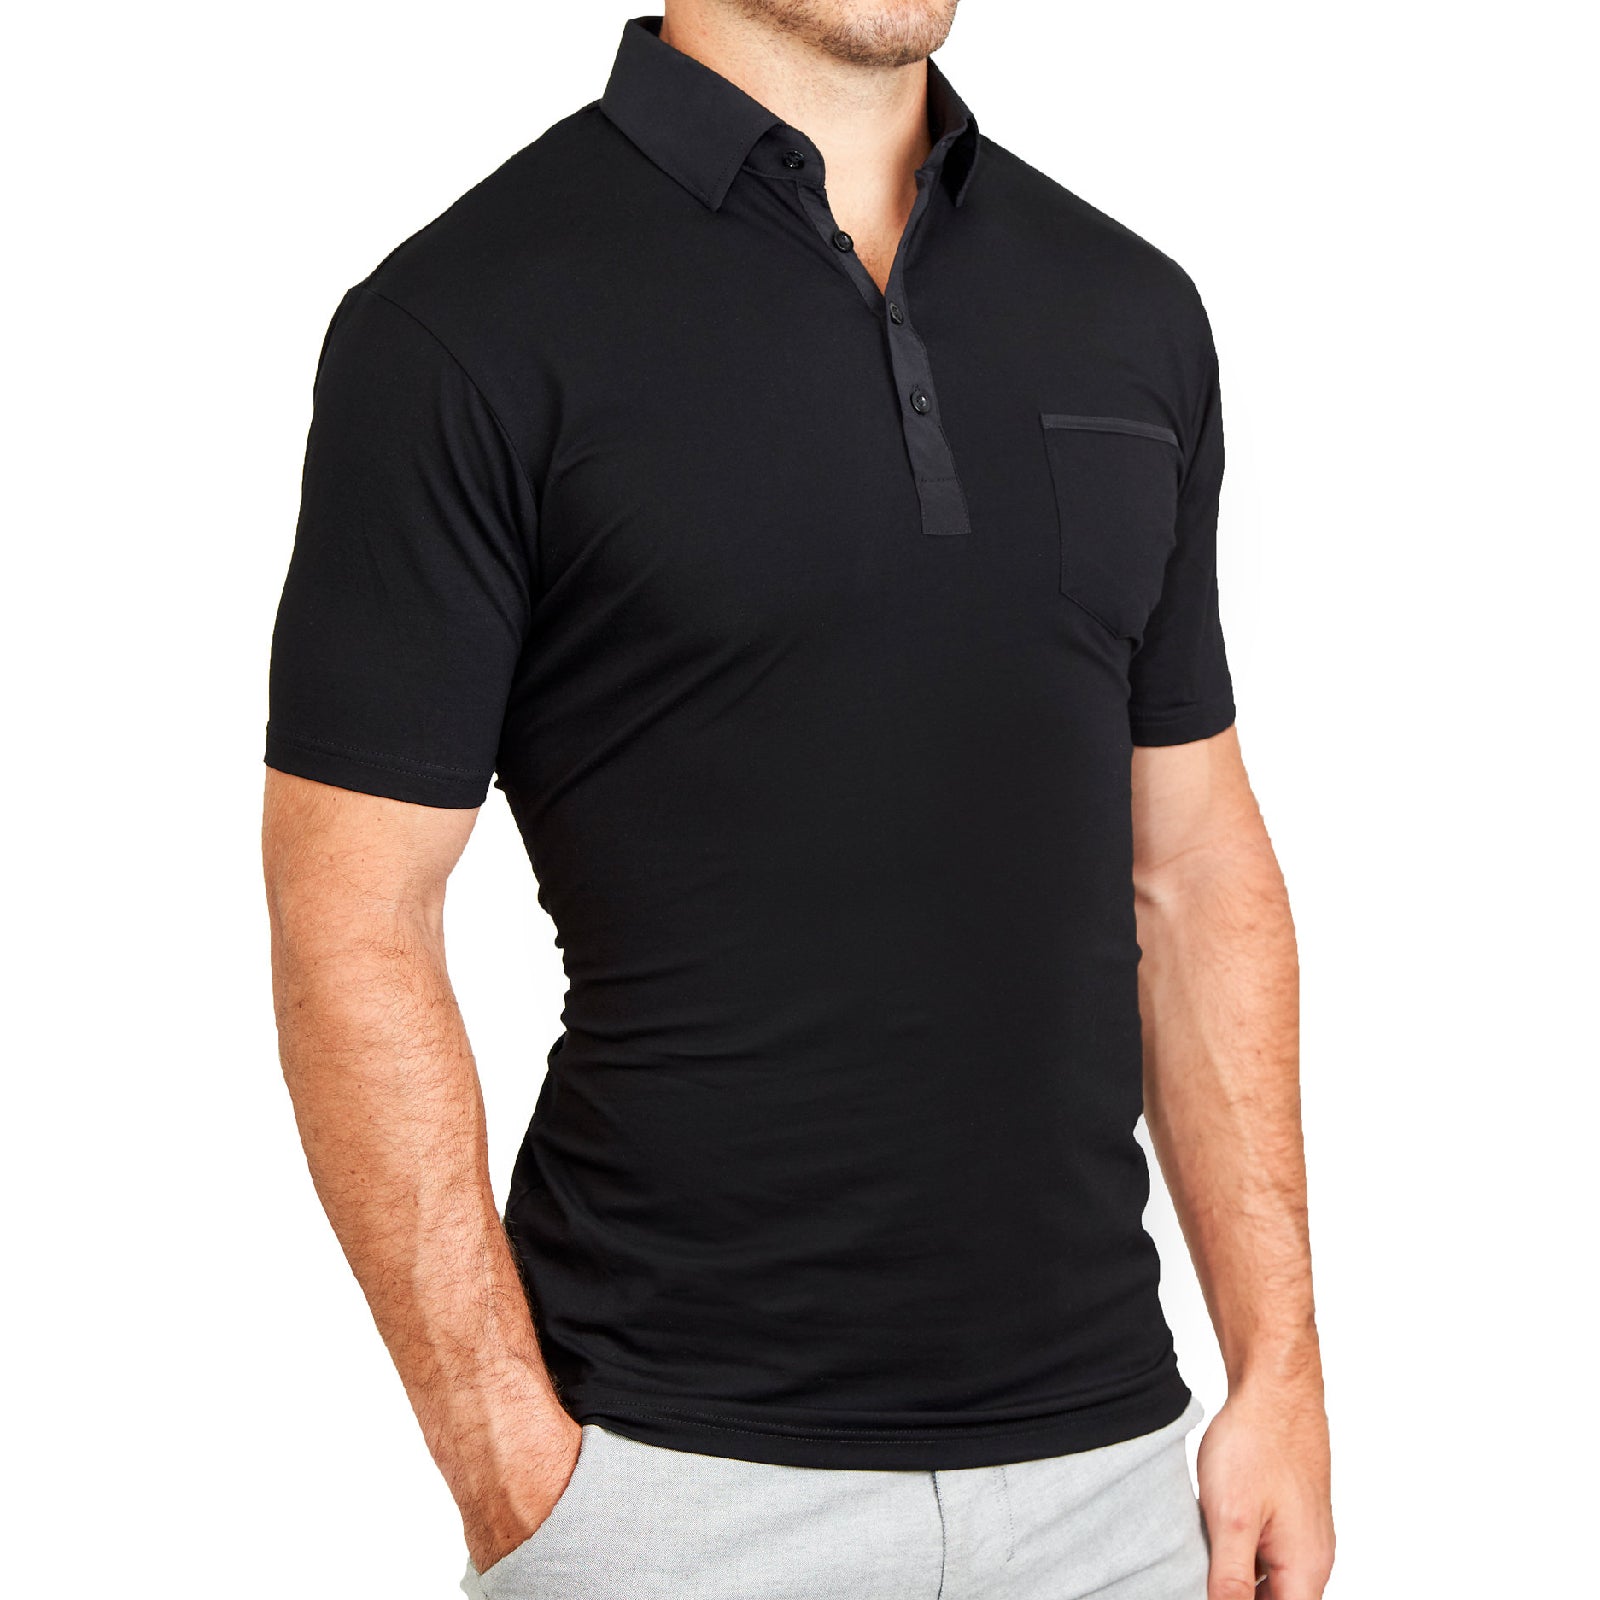 The Roth Black Short Sleeve Button Down